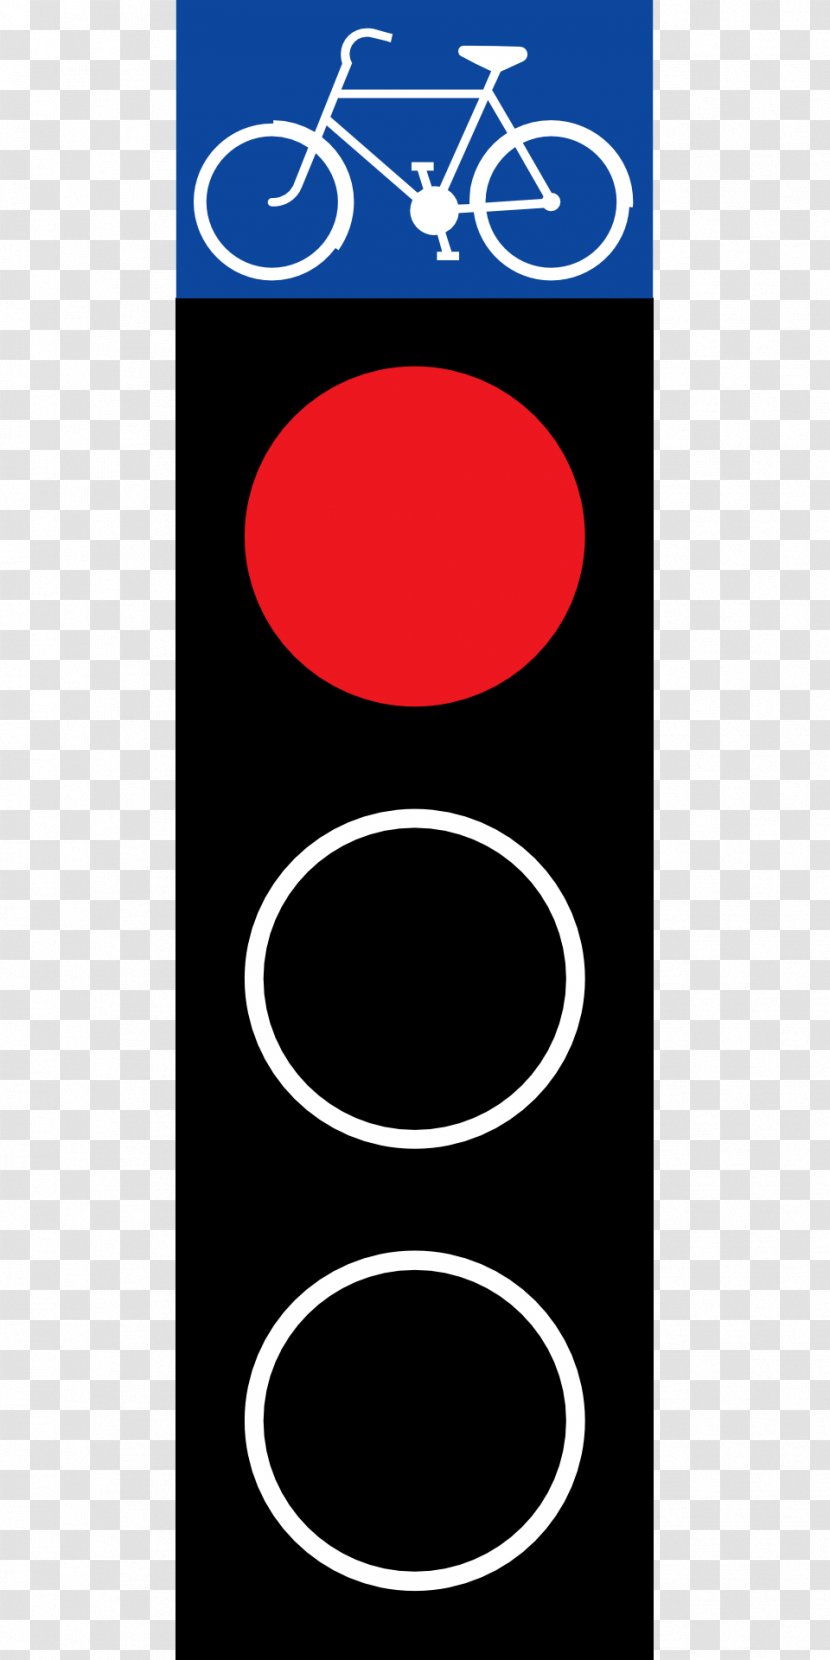 Traffic Light Bicycle Road Sign - Brand Transparent PNG